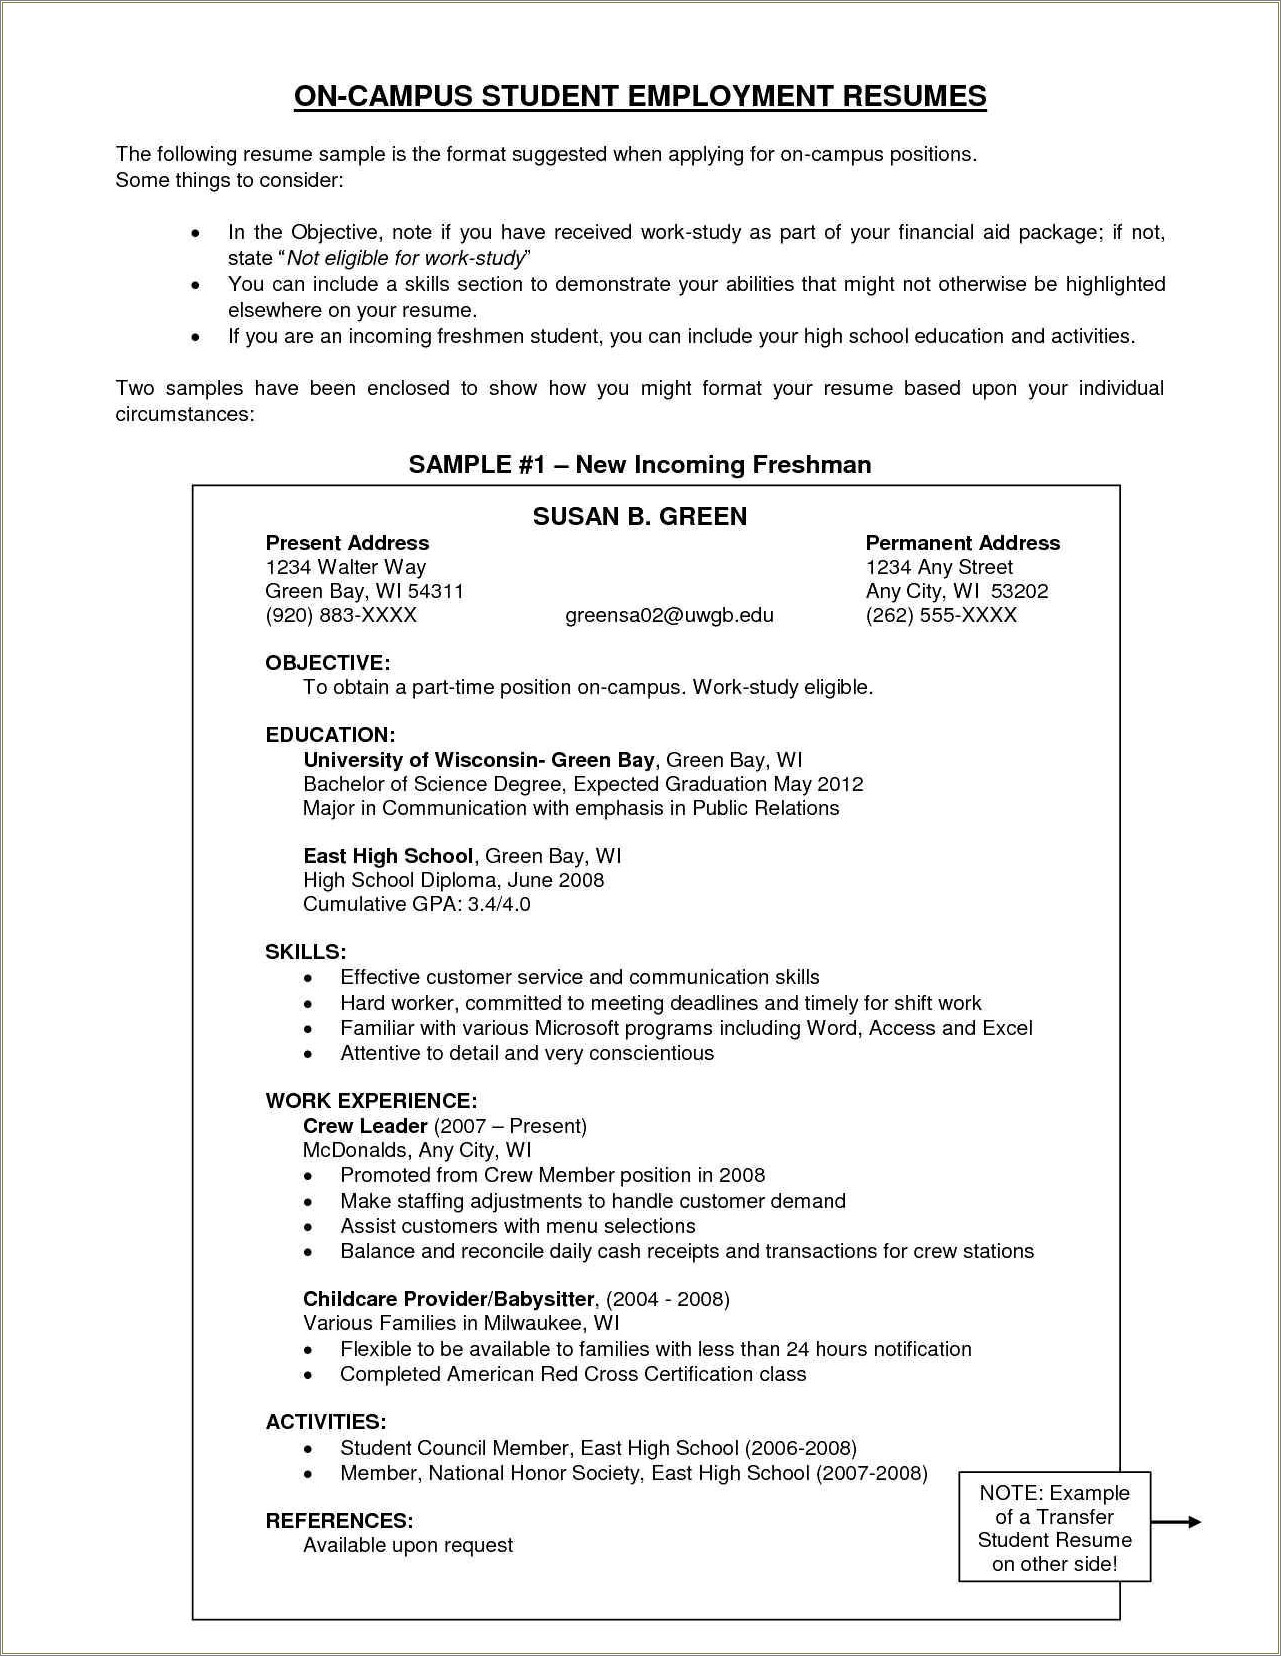 Where To Put College Certificate On Resume Reddit